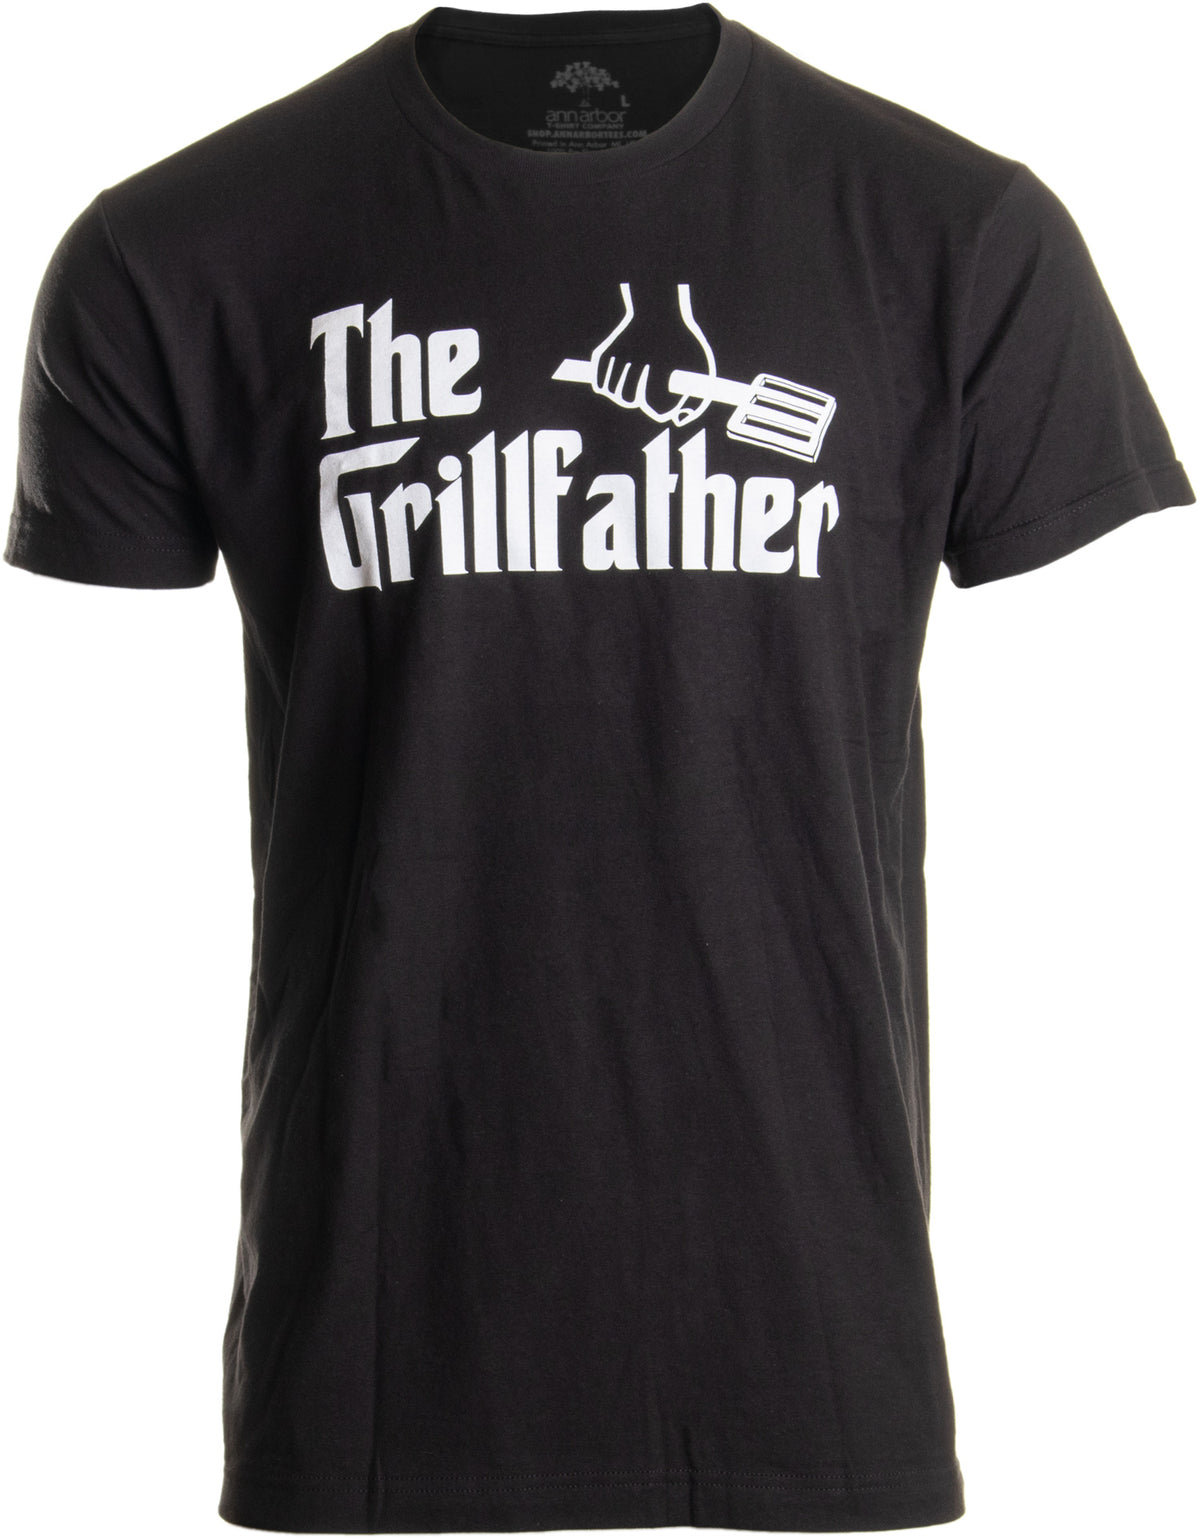 The Grillfather - Funny Dad Grandpa Grilling BBQ Meat T-shirt Joke for Men